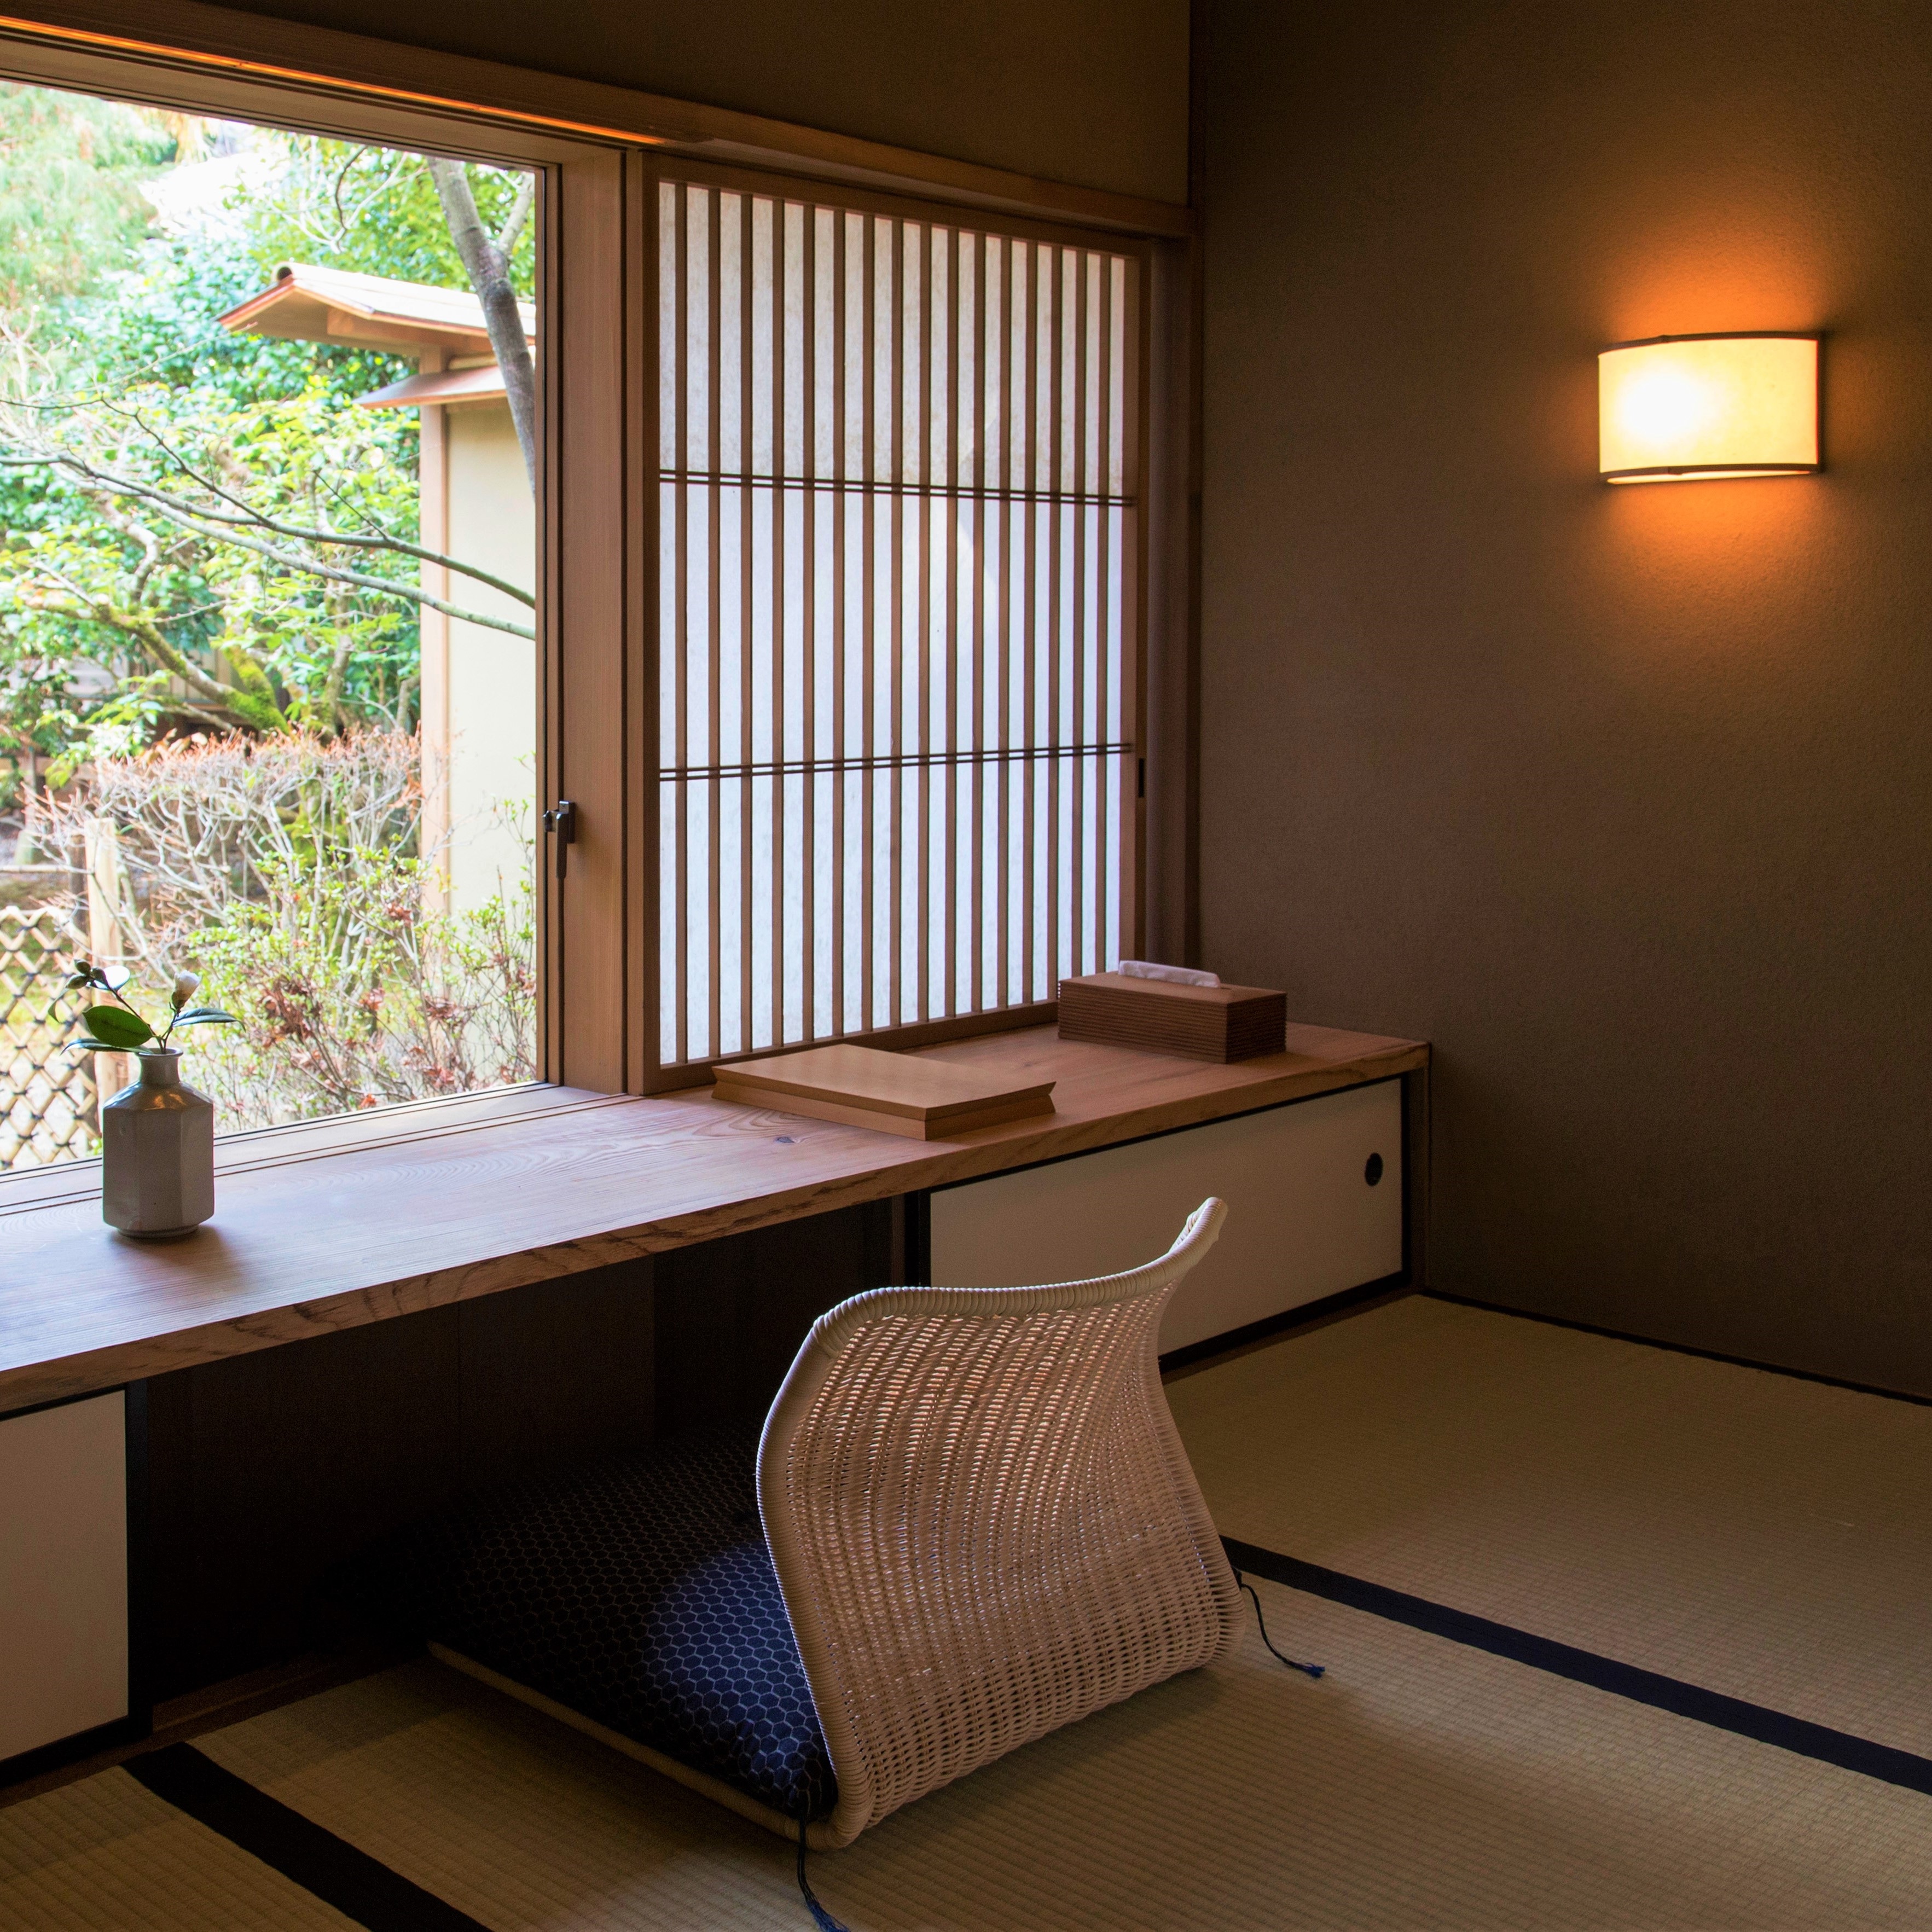 Separate Japanese-style room with open air (16th building)